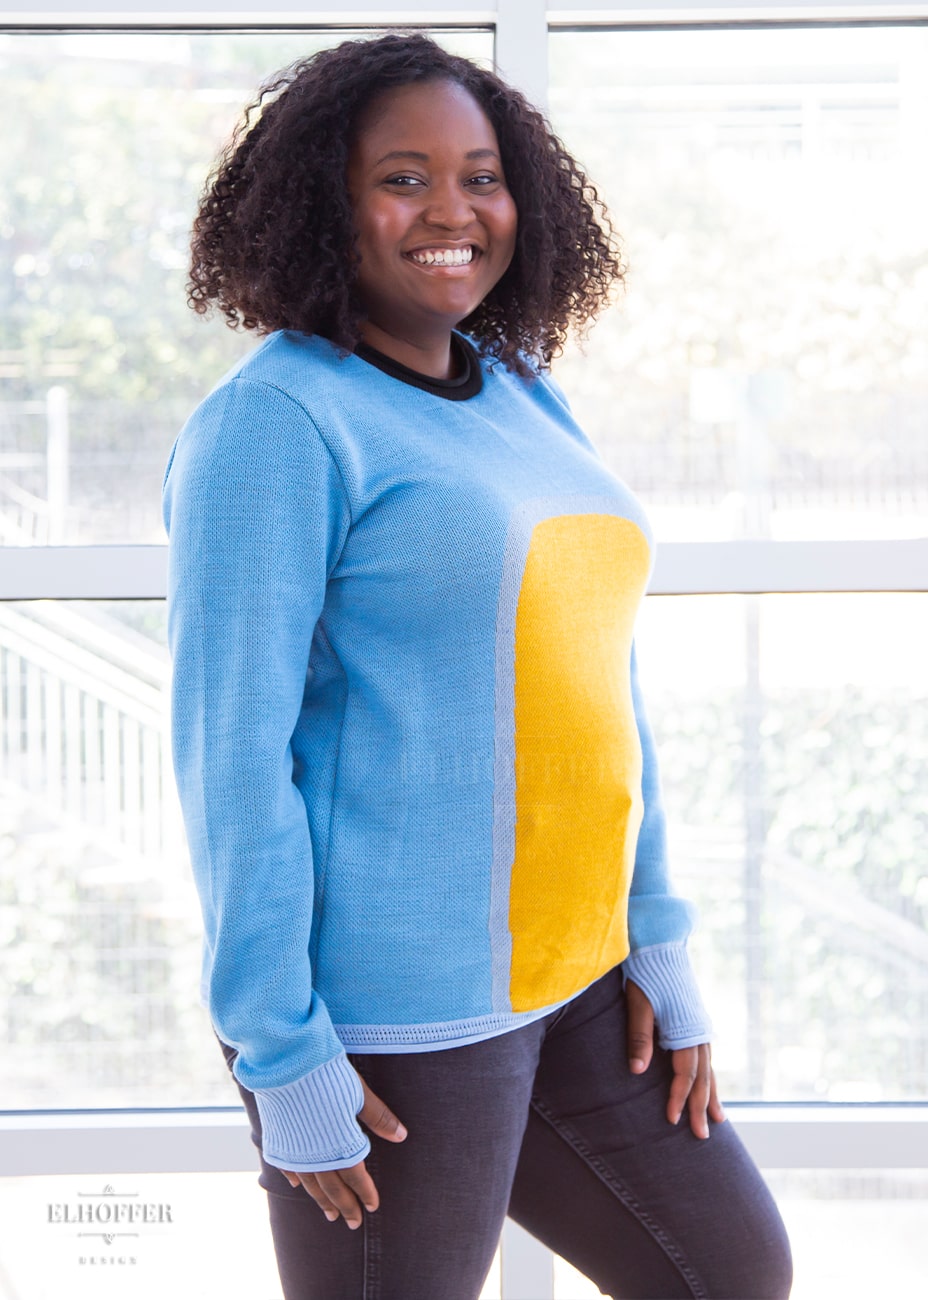 Maydelle, a medium dark skinned XL model with shoulder length curly dark brown hair, is wearing a fitted long sleeve knit sweater with wide crew neck and rolled edges and thumbholes in the sleeve. It is a medium blue with light blue cuffs and detail around the yellow oval in the middle of the sweater. It also has a black neck and black spot in the middle of the back.